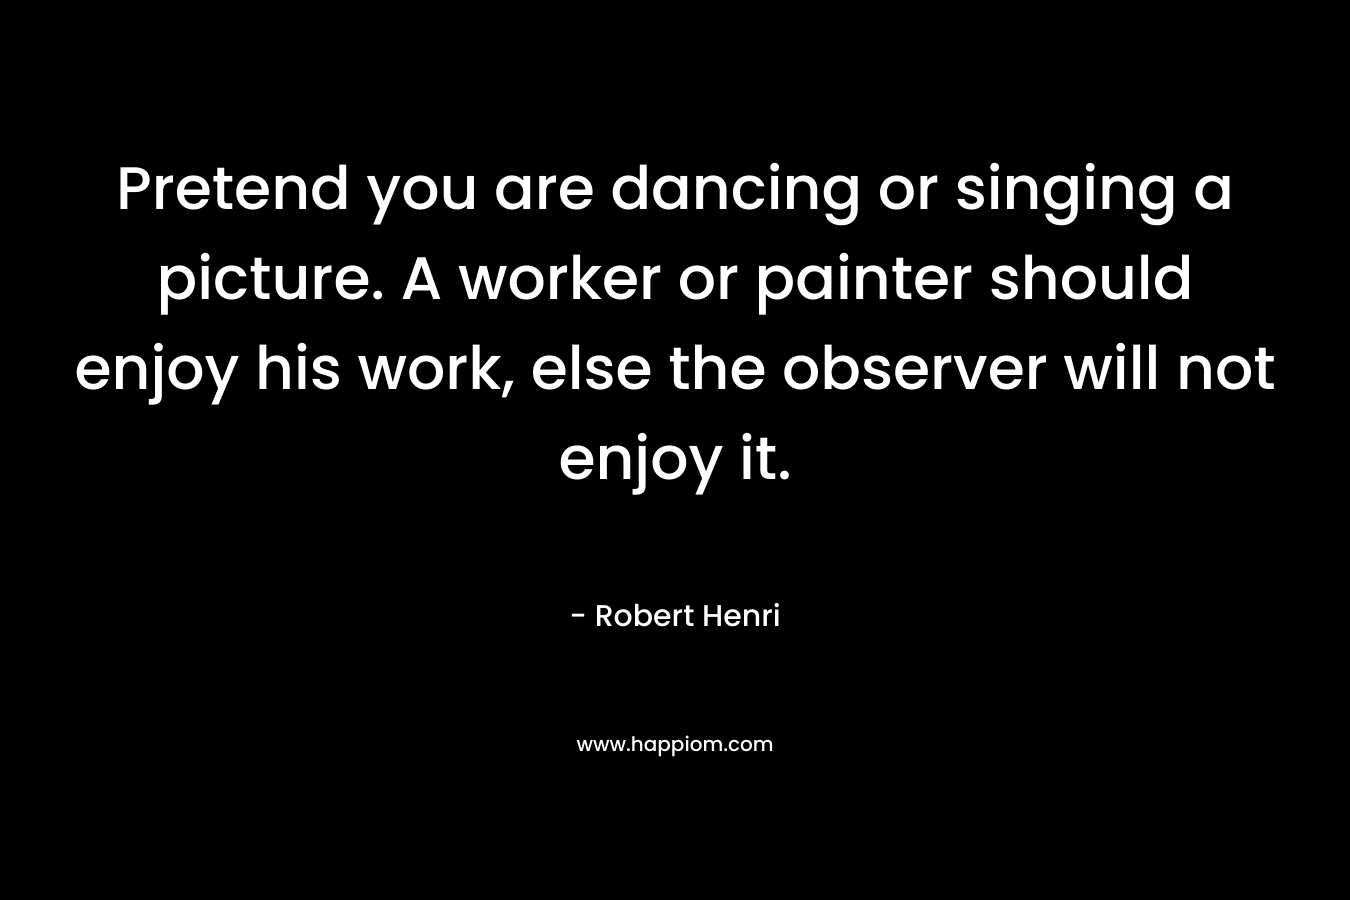 Pretend you are dancing or singing a picture. A worker or painter should enjoy his work, else the observer will not enjoy it. – Robert Henri